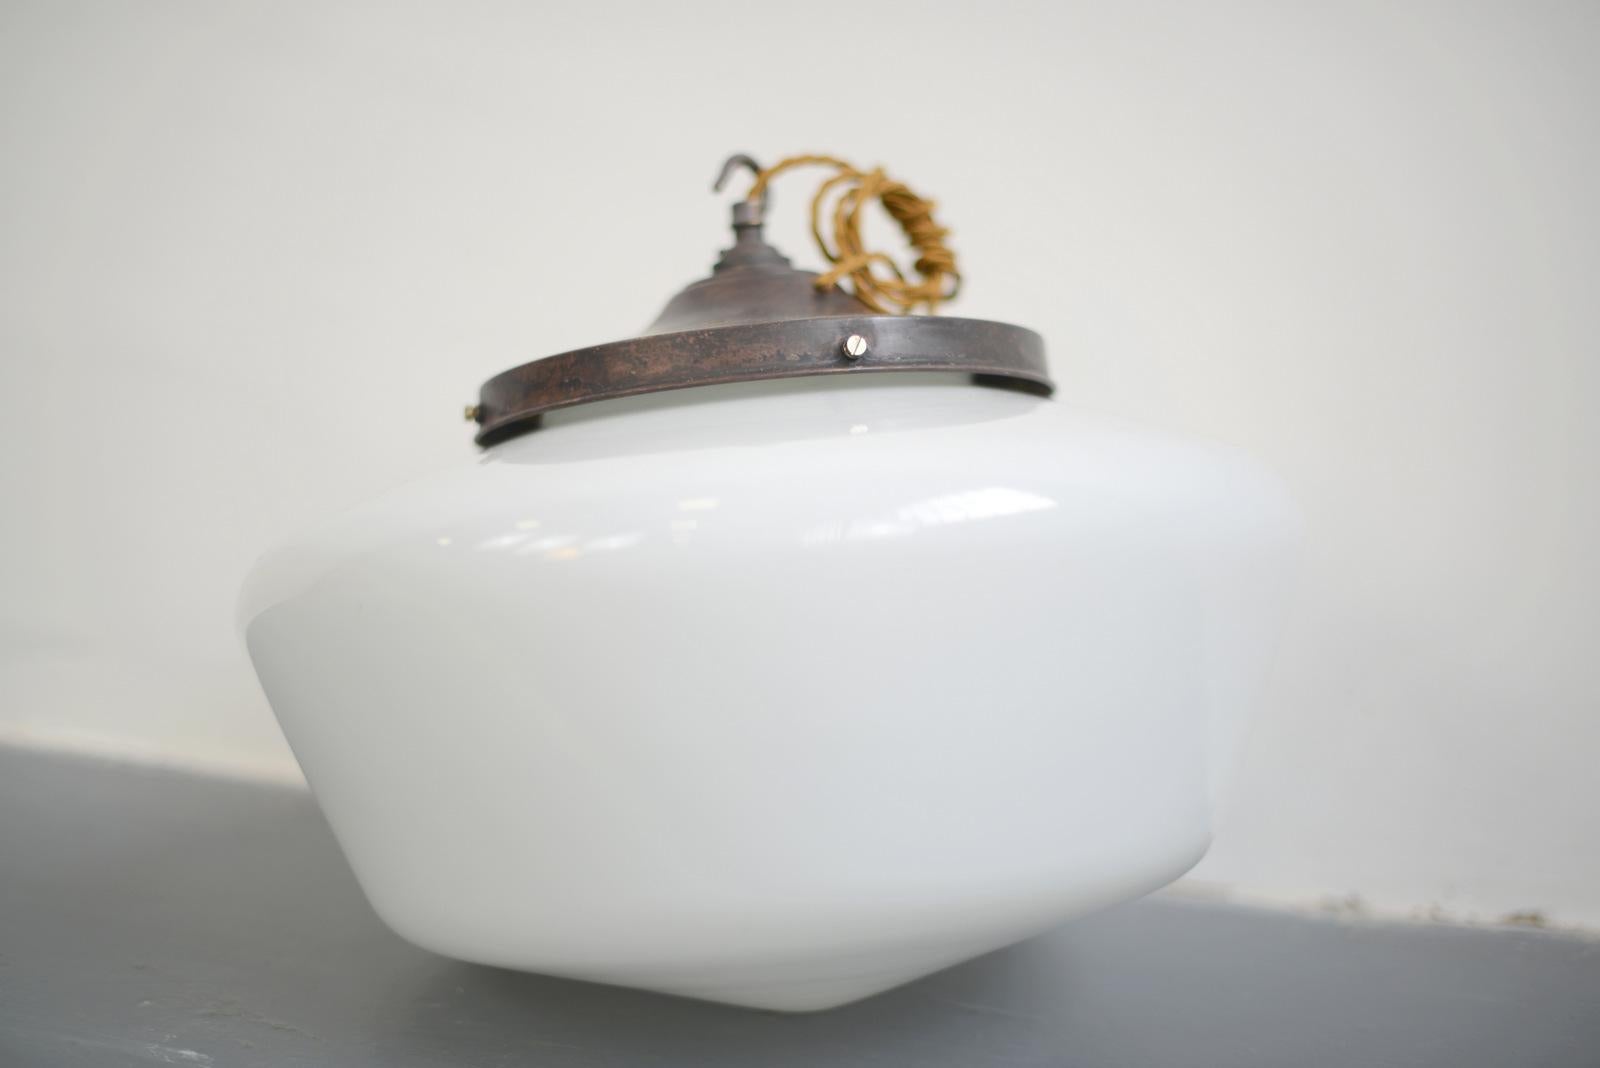 Large French opaline pendant light, circa 1930s

- Copper gallery
- White opaline glass
- Made by Mazda
Takes B22 fitting bulbs
- French, 1930s
- 40cm wide x 32cm tall

Condition report

Fully re wired with modern electrical components.
 